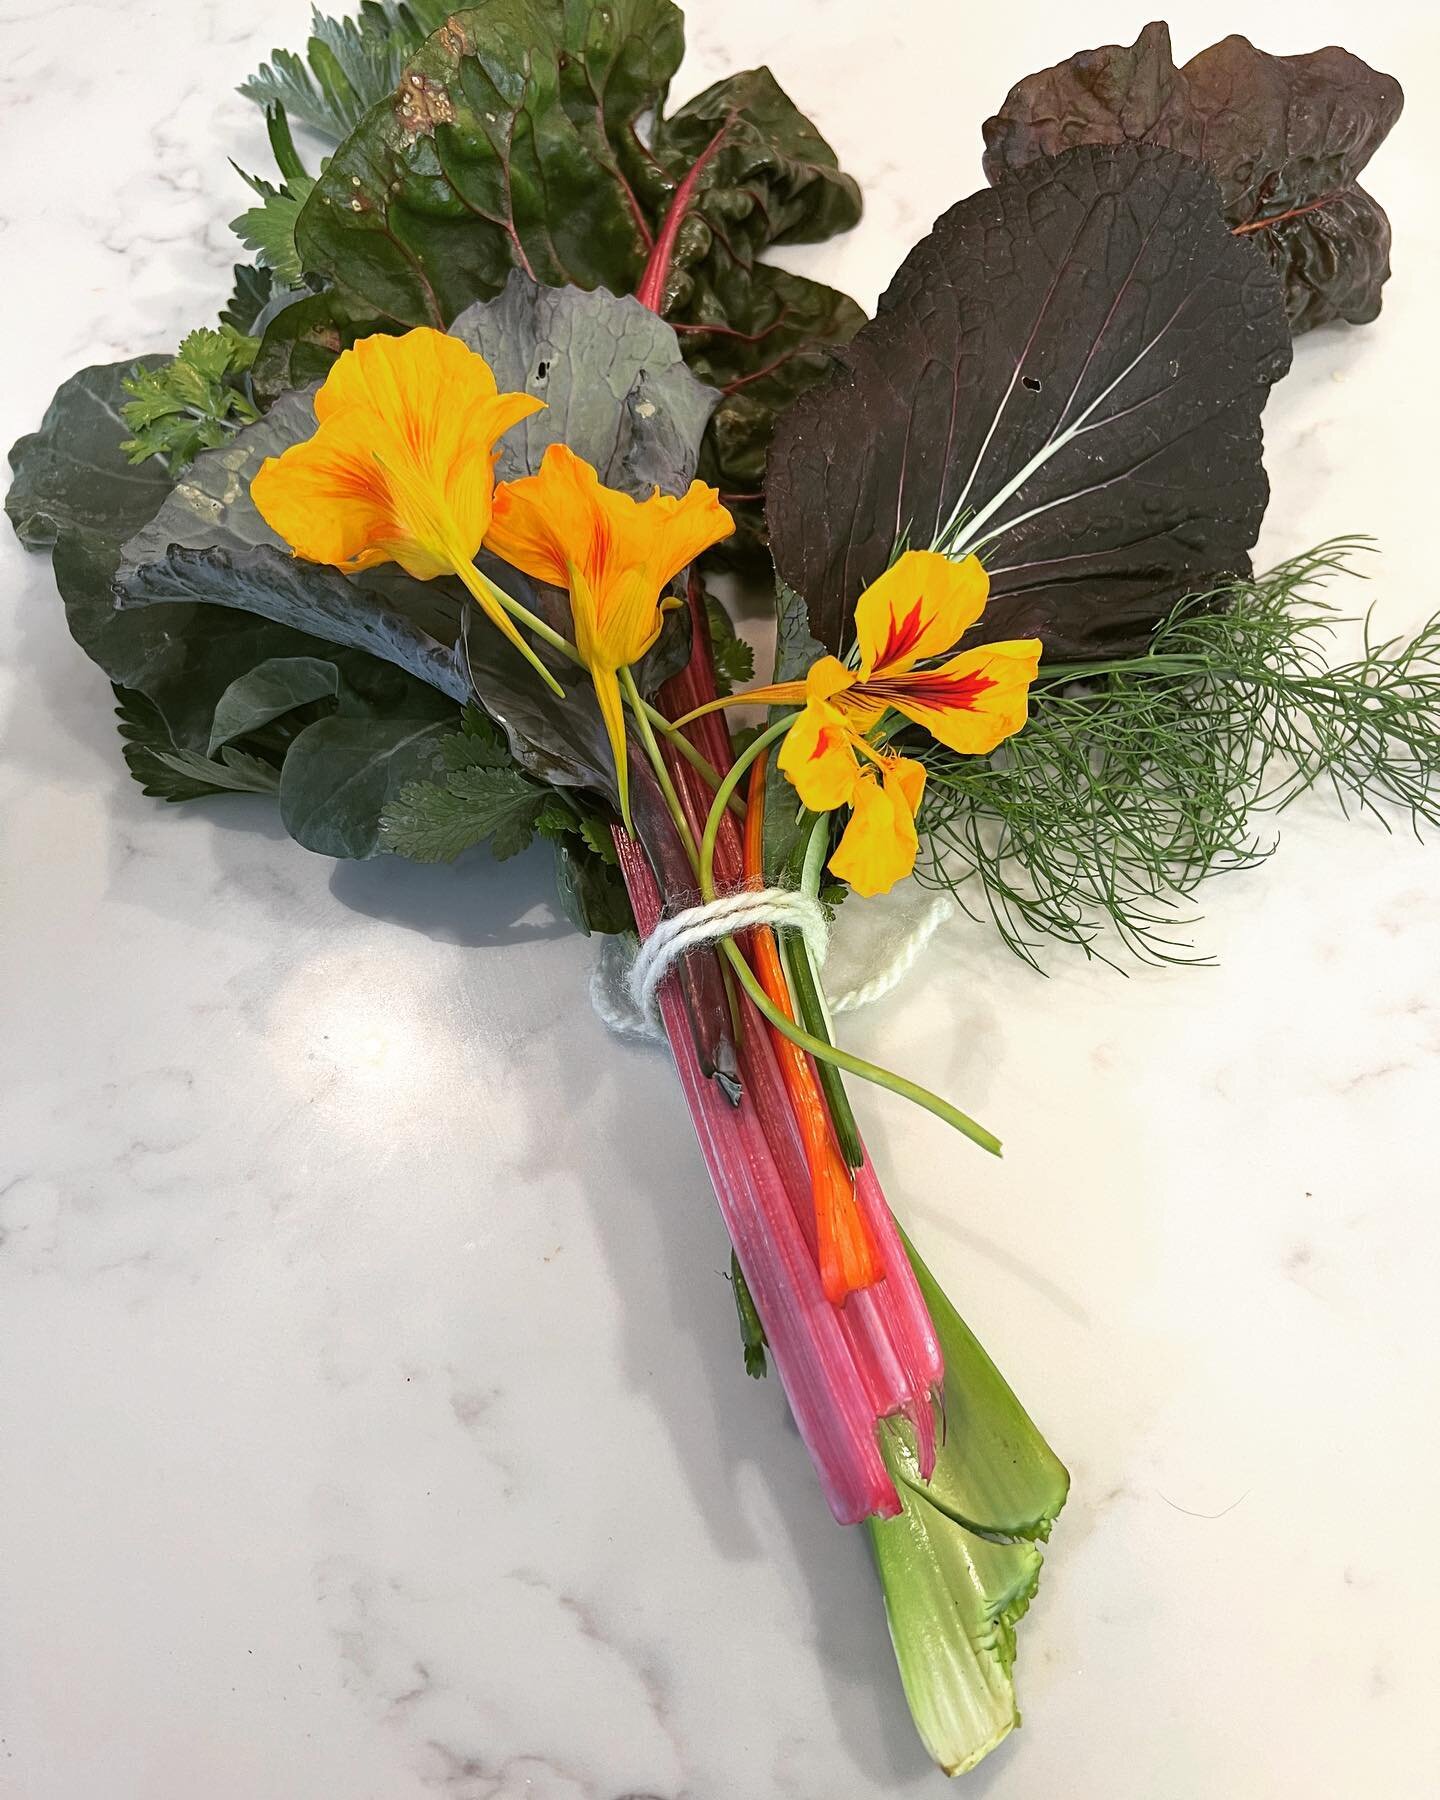 I love that my kindergartener came home with this edible bouquet from her gardening class.  Everyone should learn about how many of the plants they see in gardens are edible and get the chance to plant, taste and gather these gems!  We are going to i